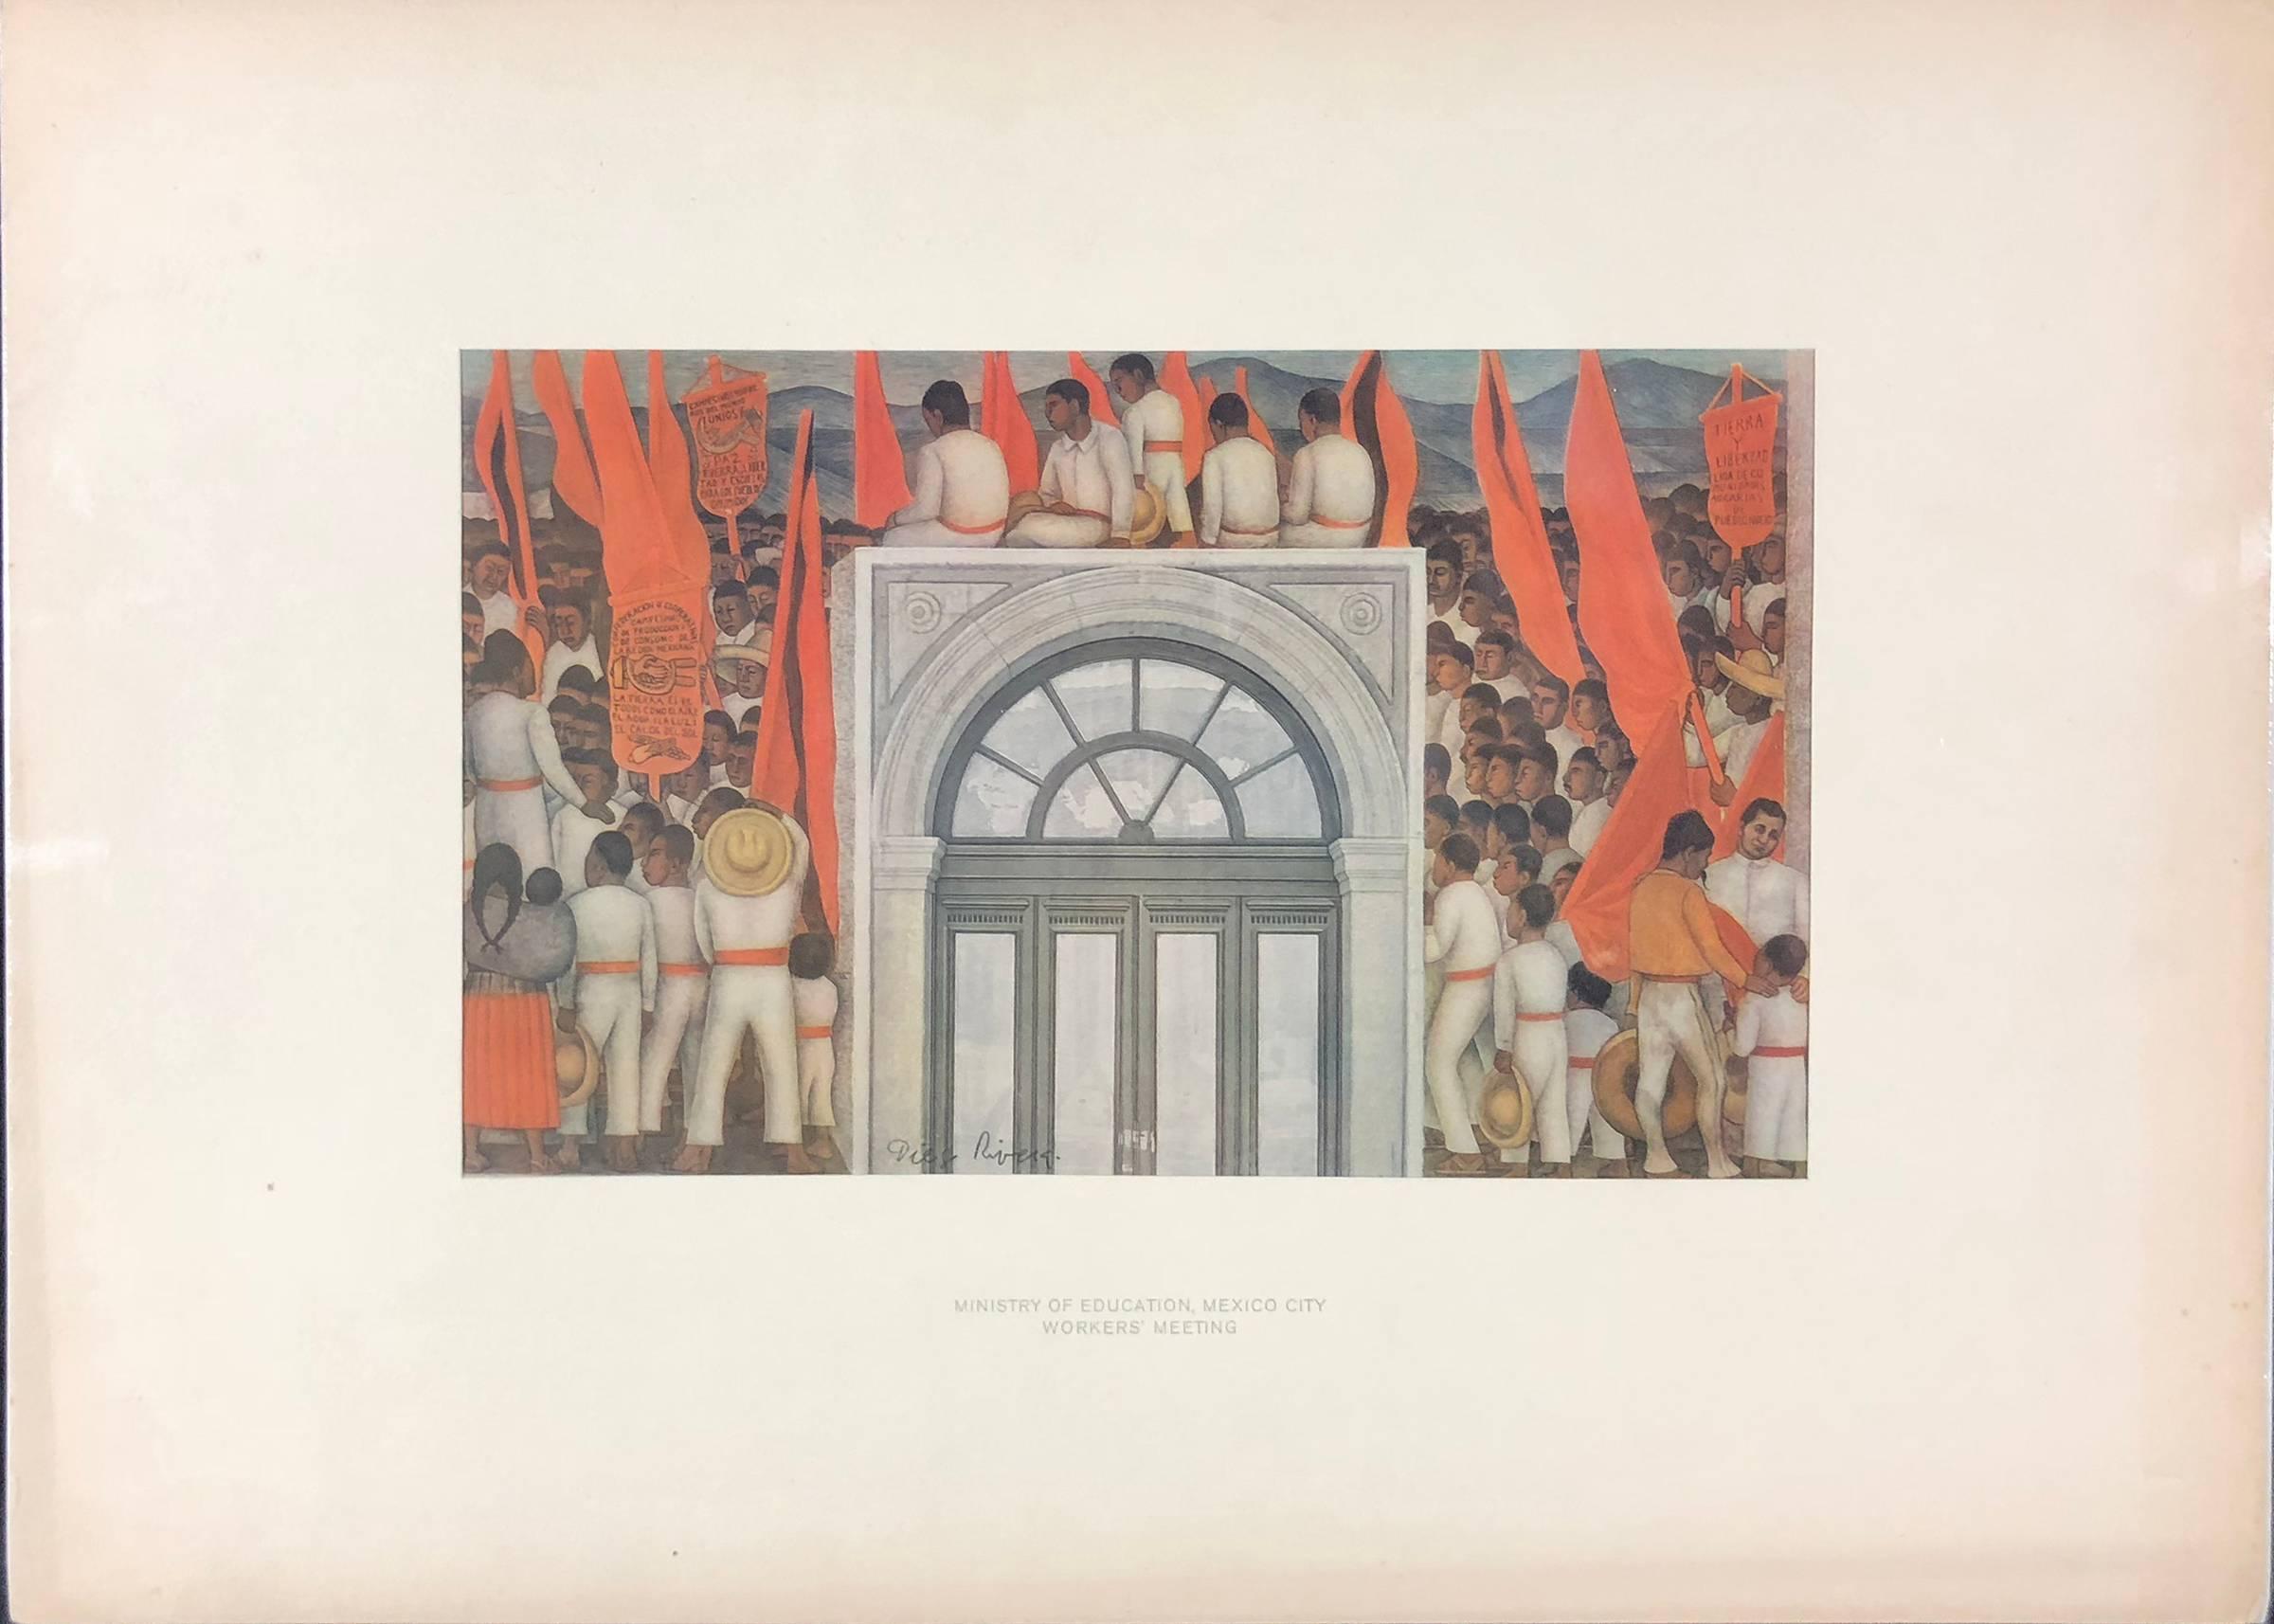 Ministry of Education, Mexico City (Workers' Meeting) - Print by (after) Diego Rivera